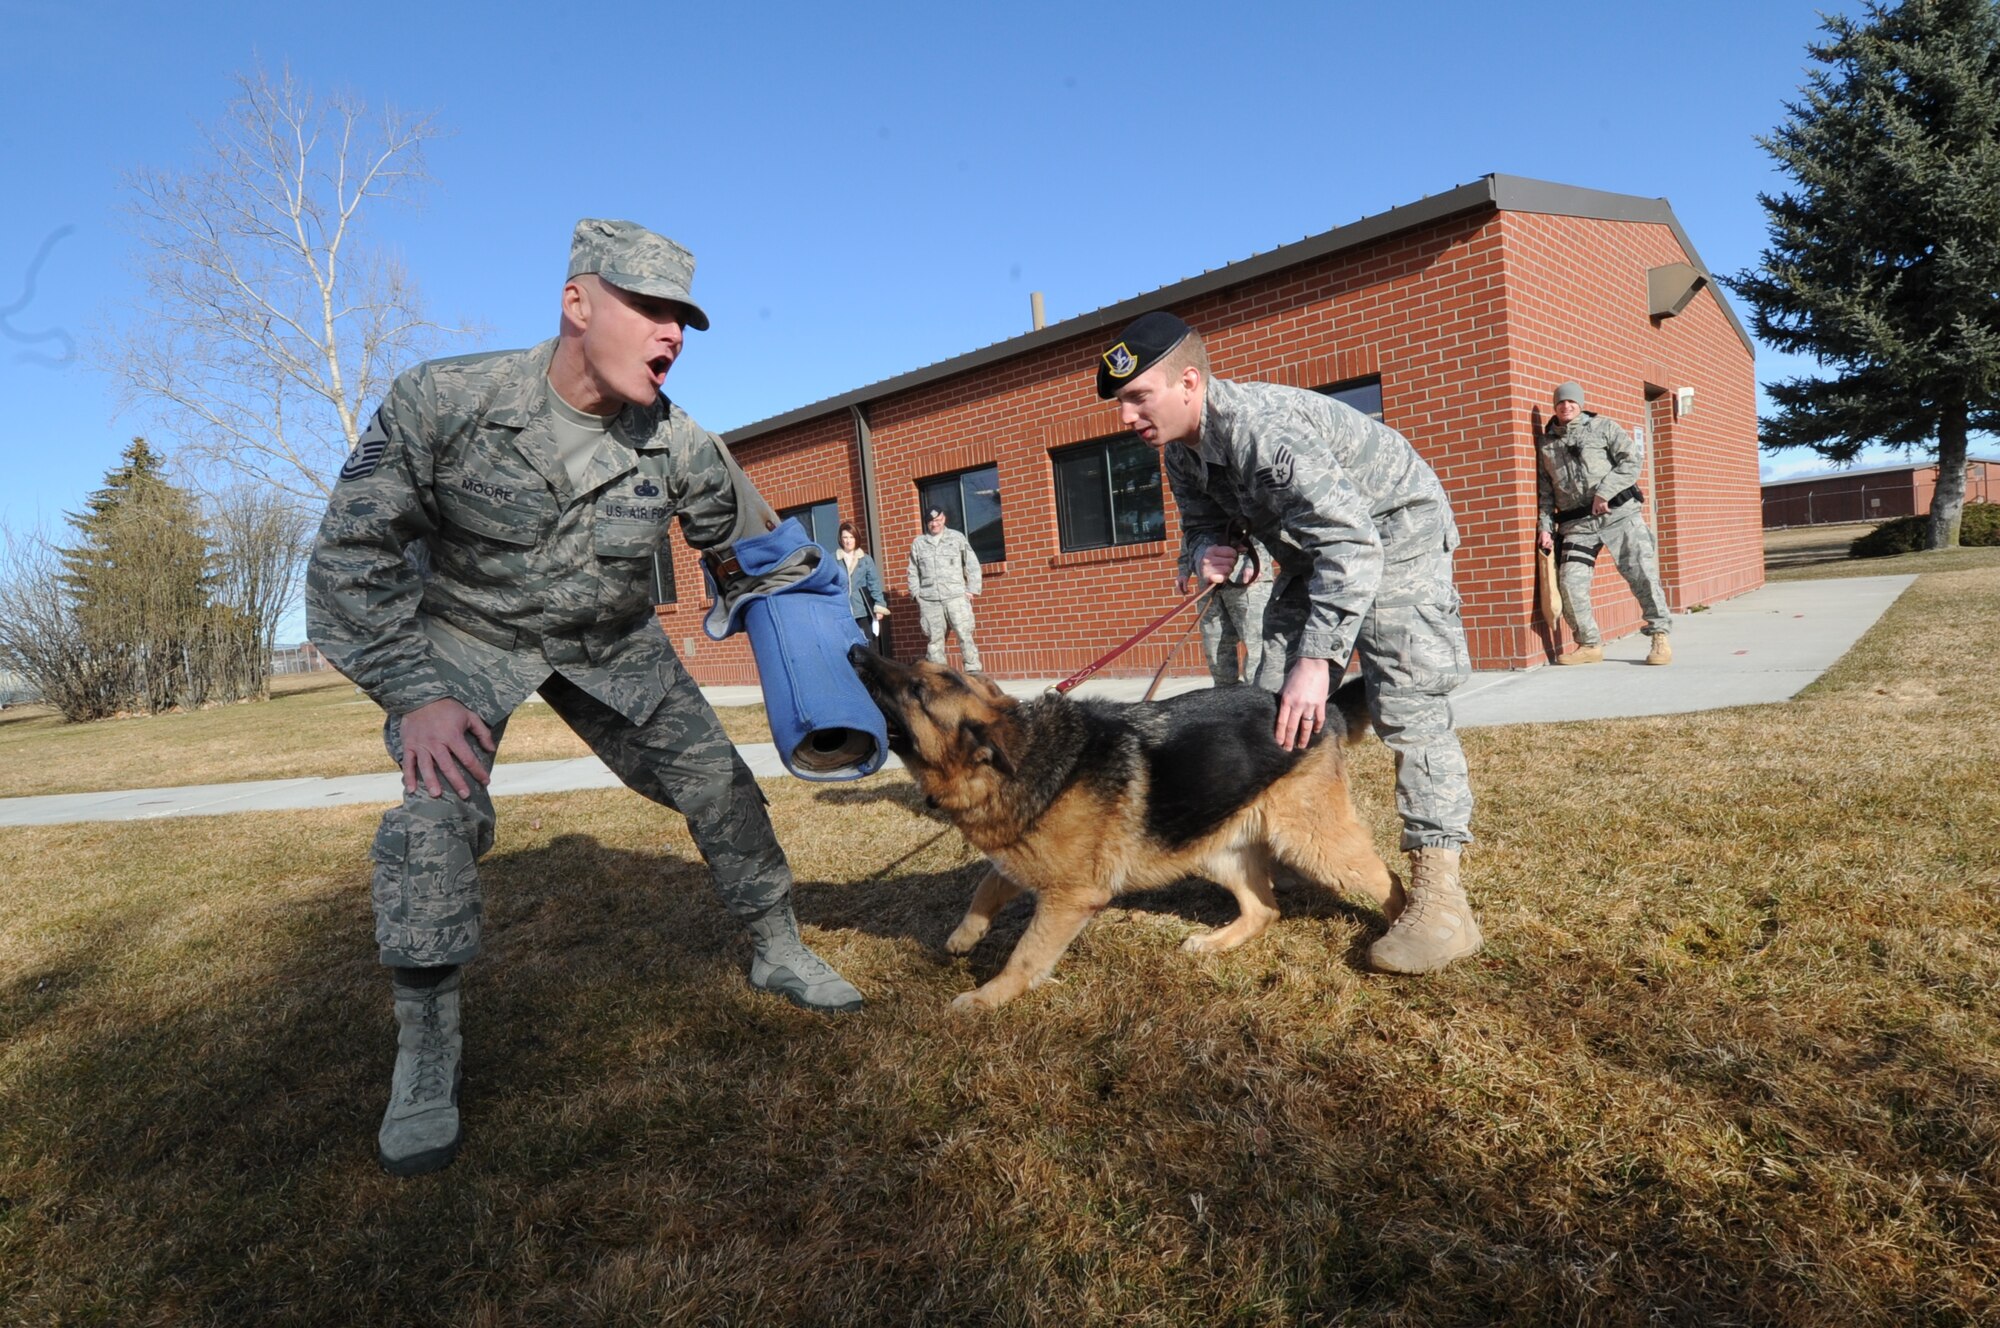 Master Sgt. Michael Moore Jr. (left), first sergeant for the 92nd Security Forces Squadron, meets with a military working dog handler and dog during operations at his squadron at Fairchild Air Force Base, Wash., in 2010. On April 1, 2011, Sergeant Moore was named the 2010 Air Mobility Command First Sergeant of the Year. (U.S. Air Force Photo)

